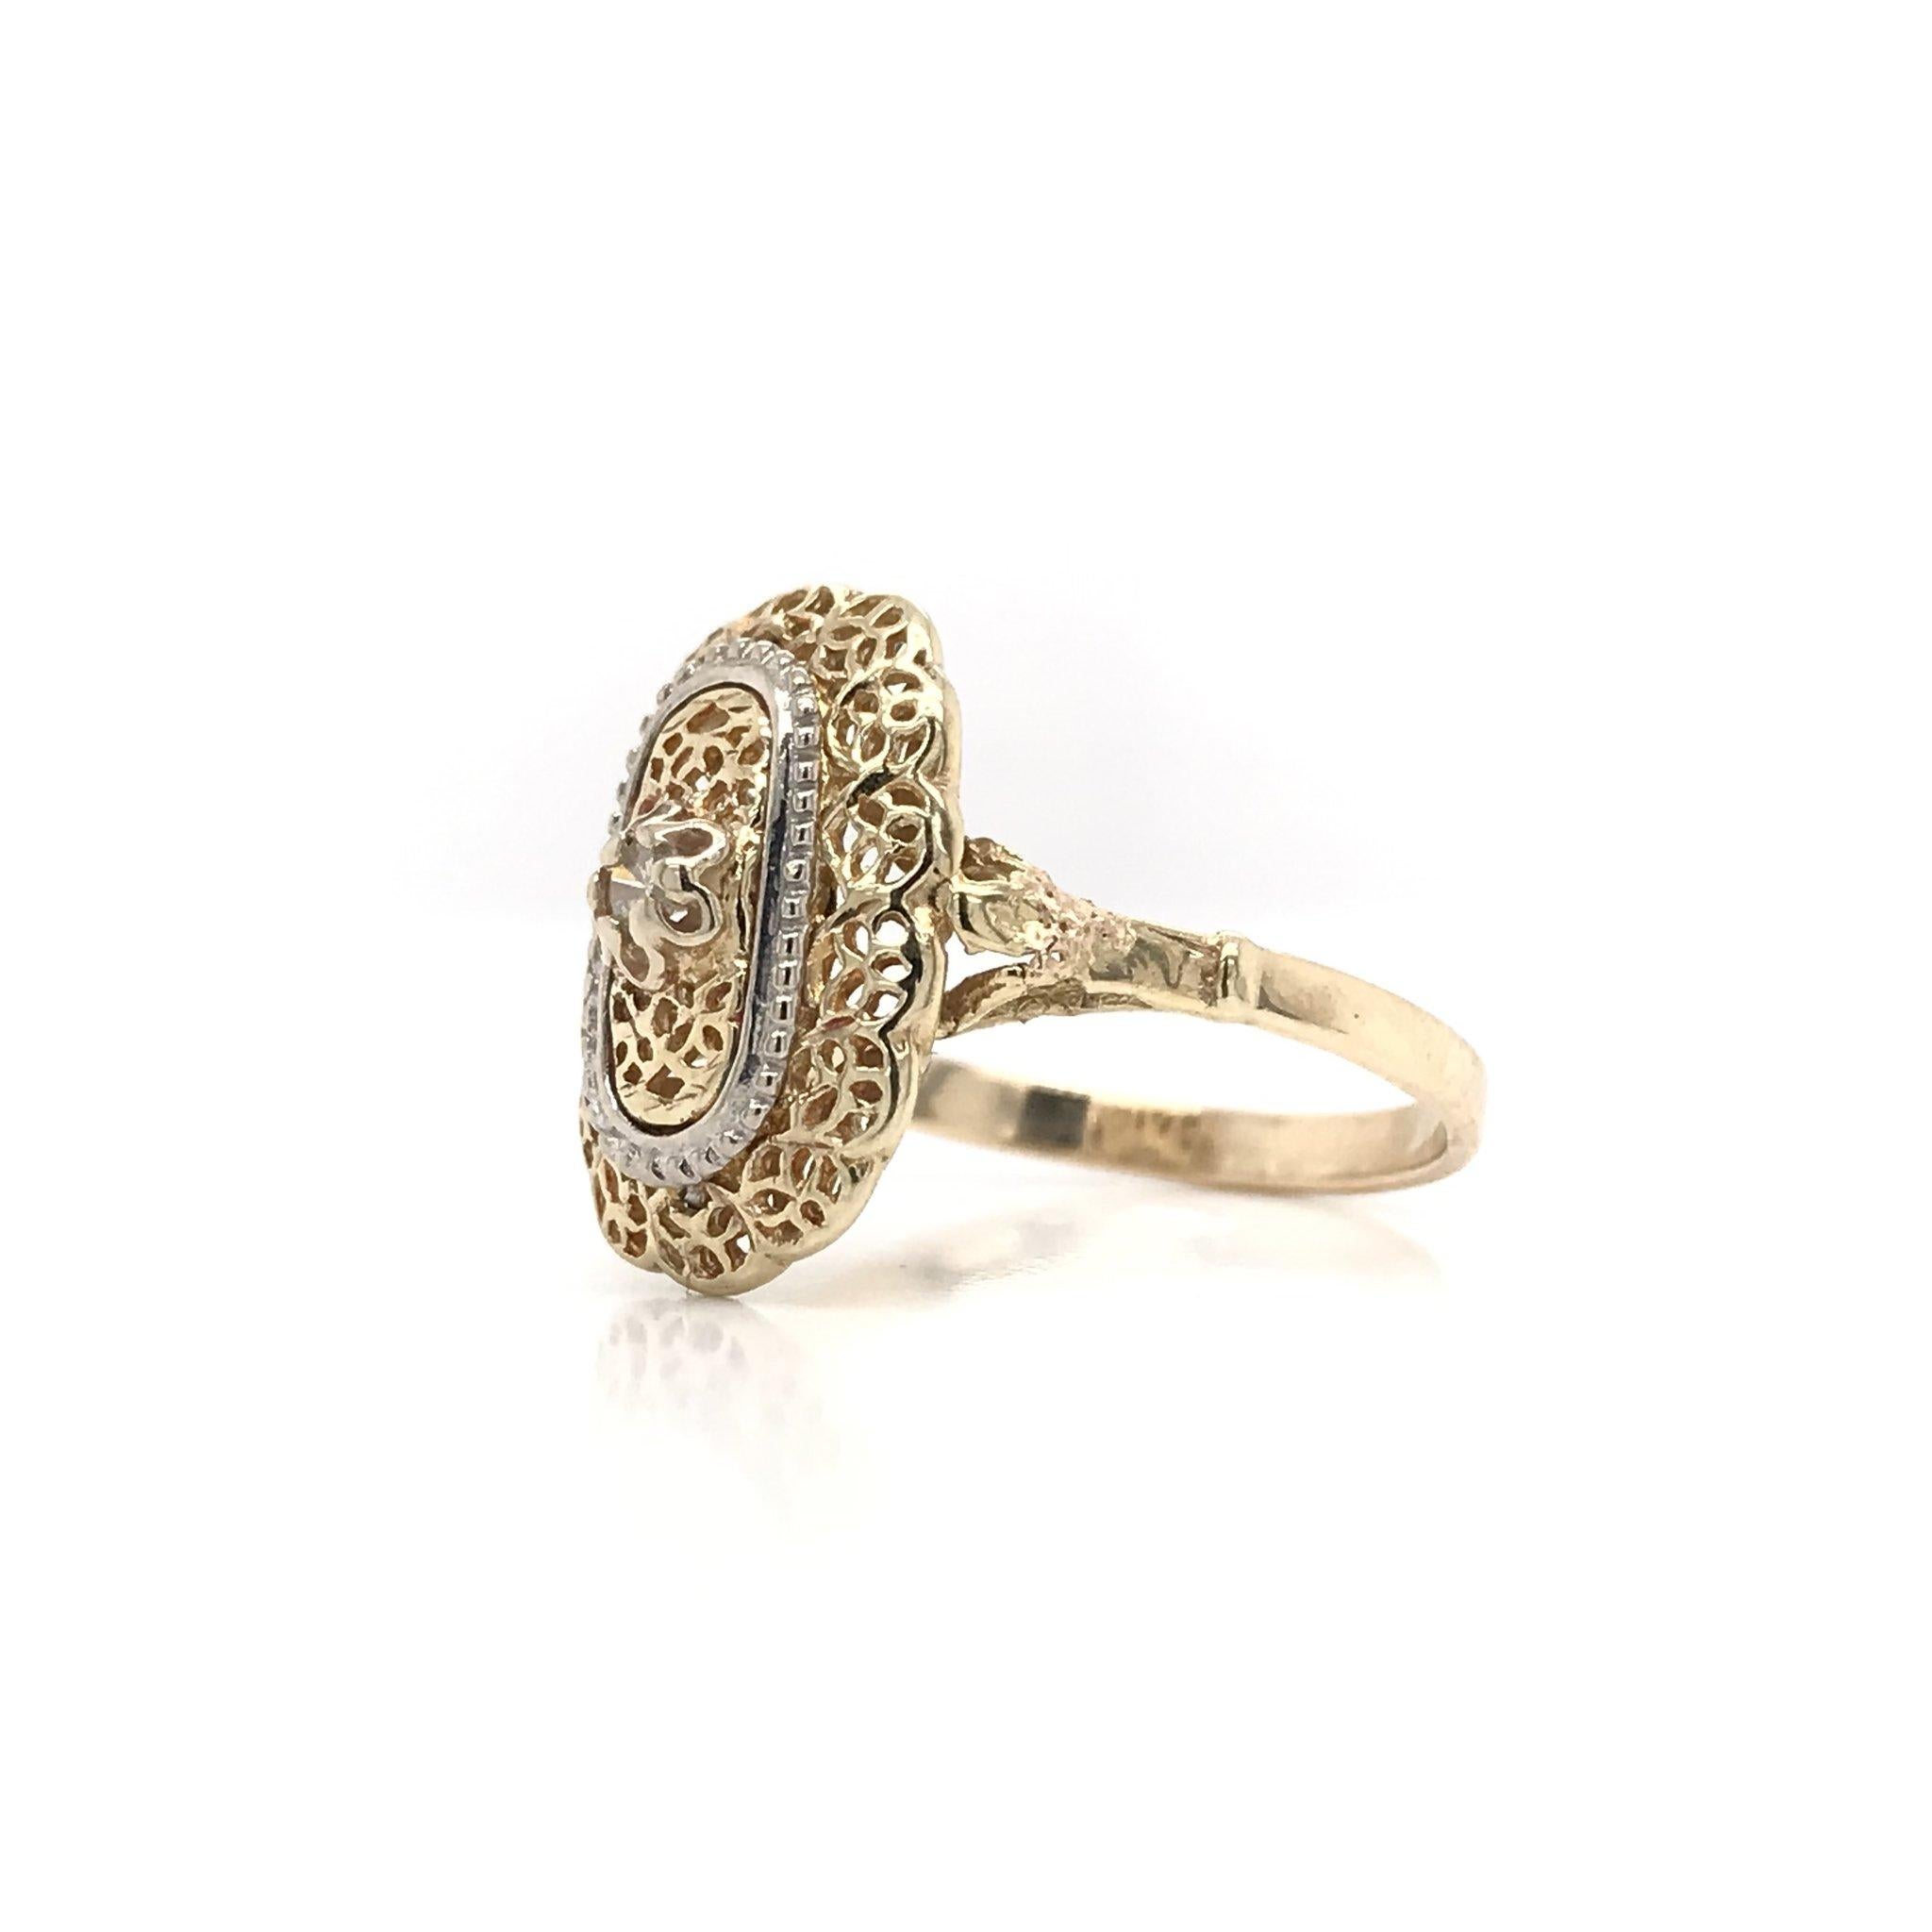 This ring was crafted sometime during the Mid Century design period ( 1940-1960 ). The setting is 14k yellow gold and features 14k white gold accents as well as a tiny center diamond. The ring features a scalloped lace motif along with filigreed